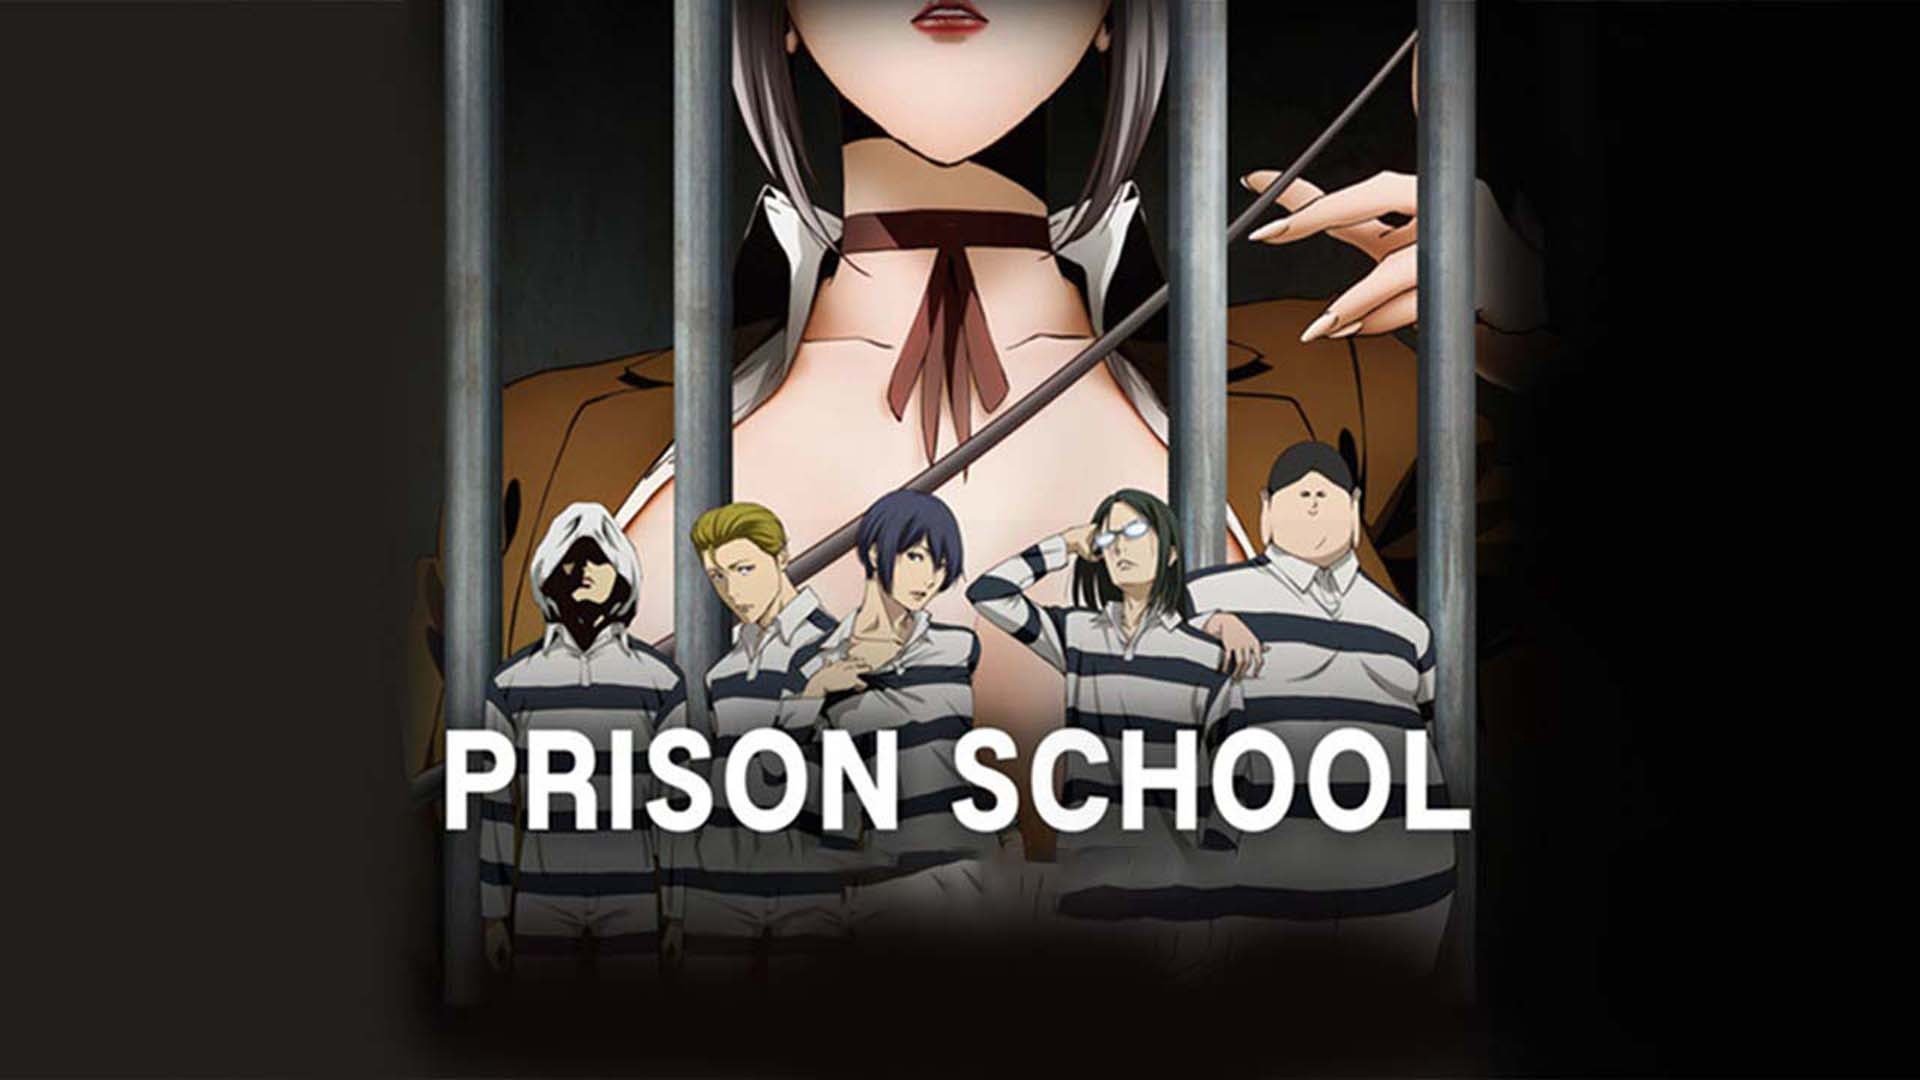 beth arvidson recommends watch prison school online pic